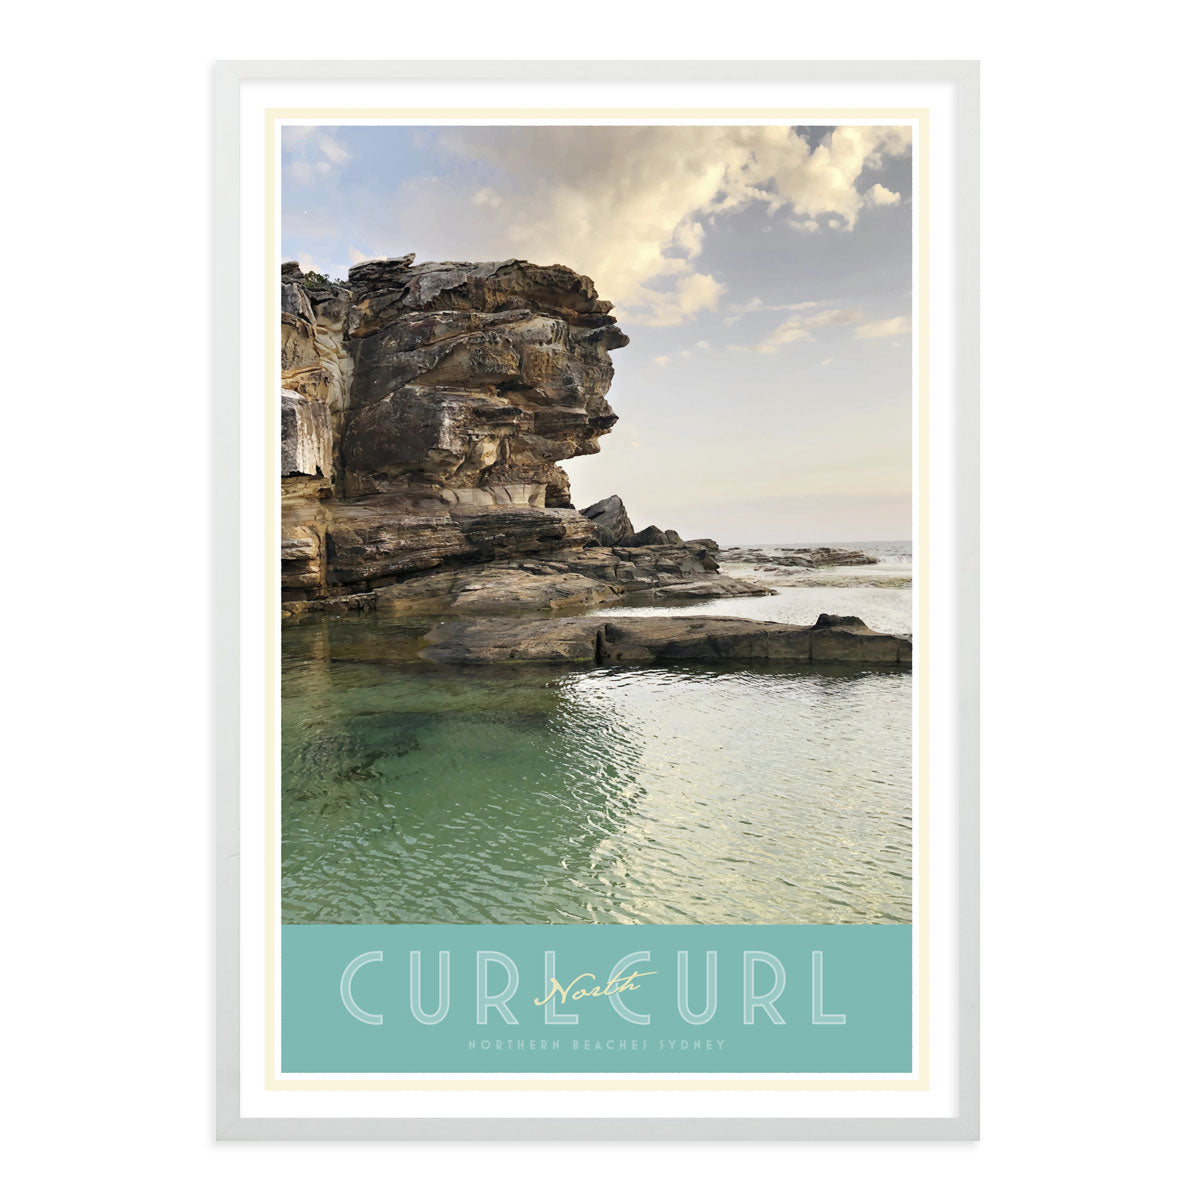 North Curl Curl Pool vintage travel style print by places we luv